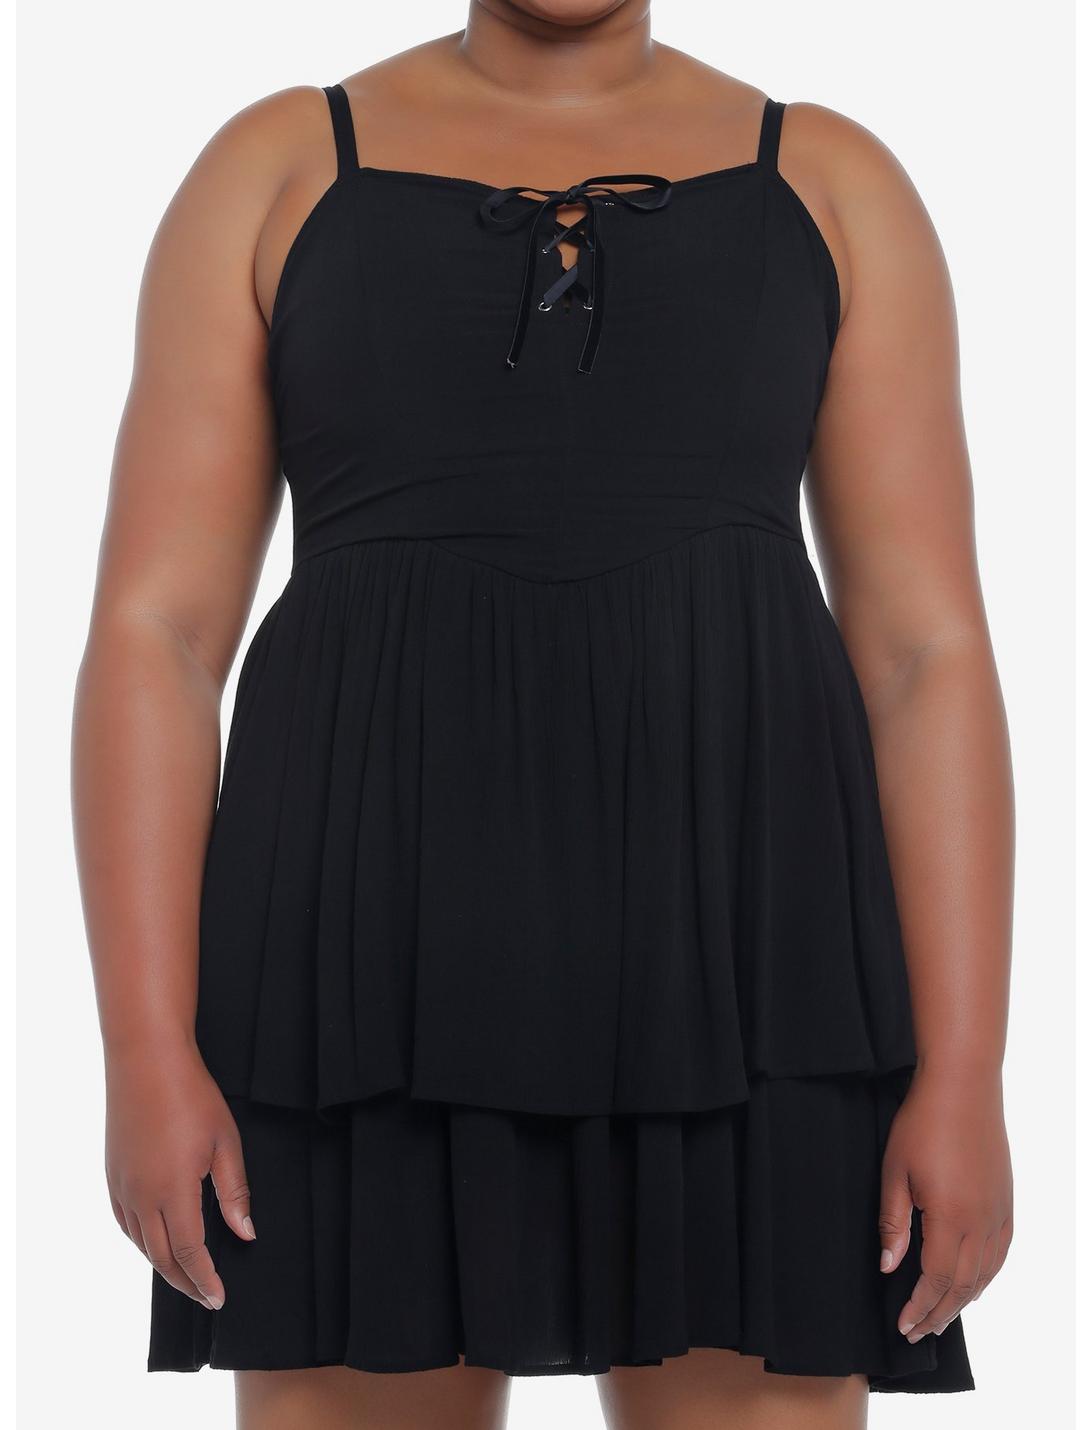 Black Strappy Tiered Dress Plus Size, MULTI, hi-res